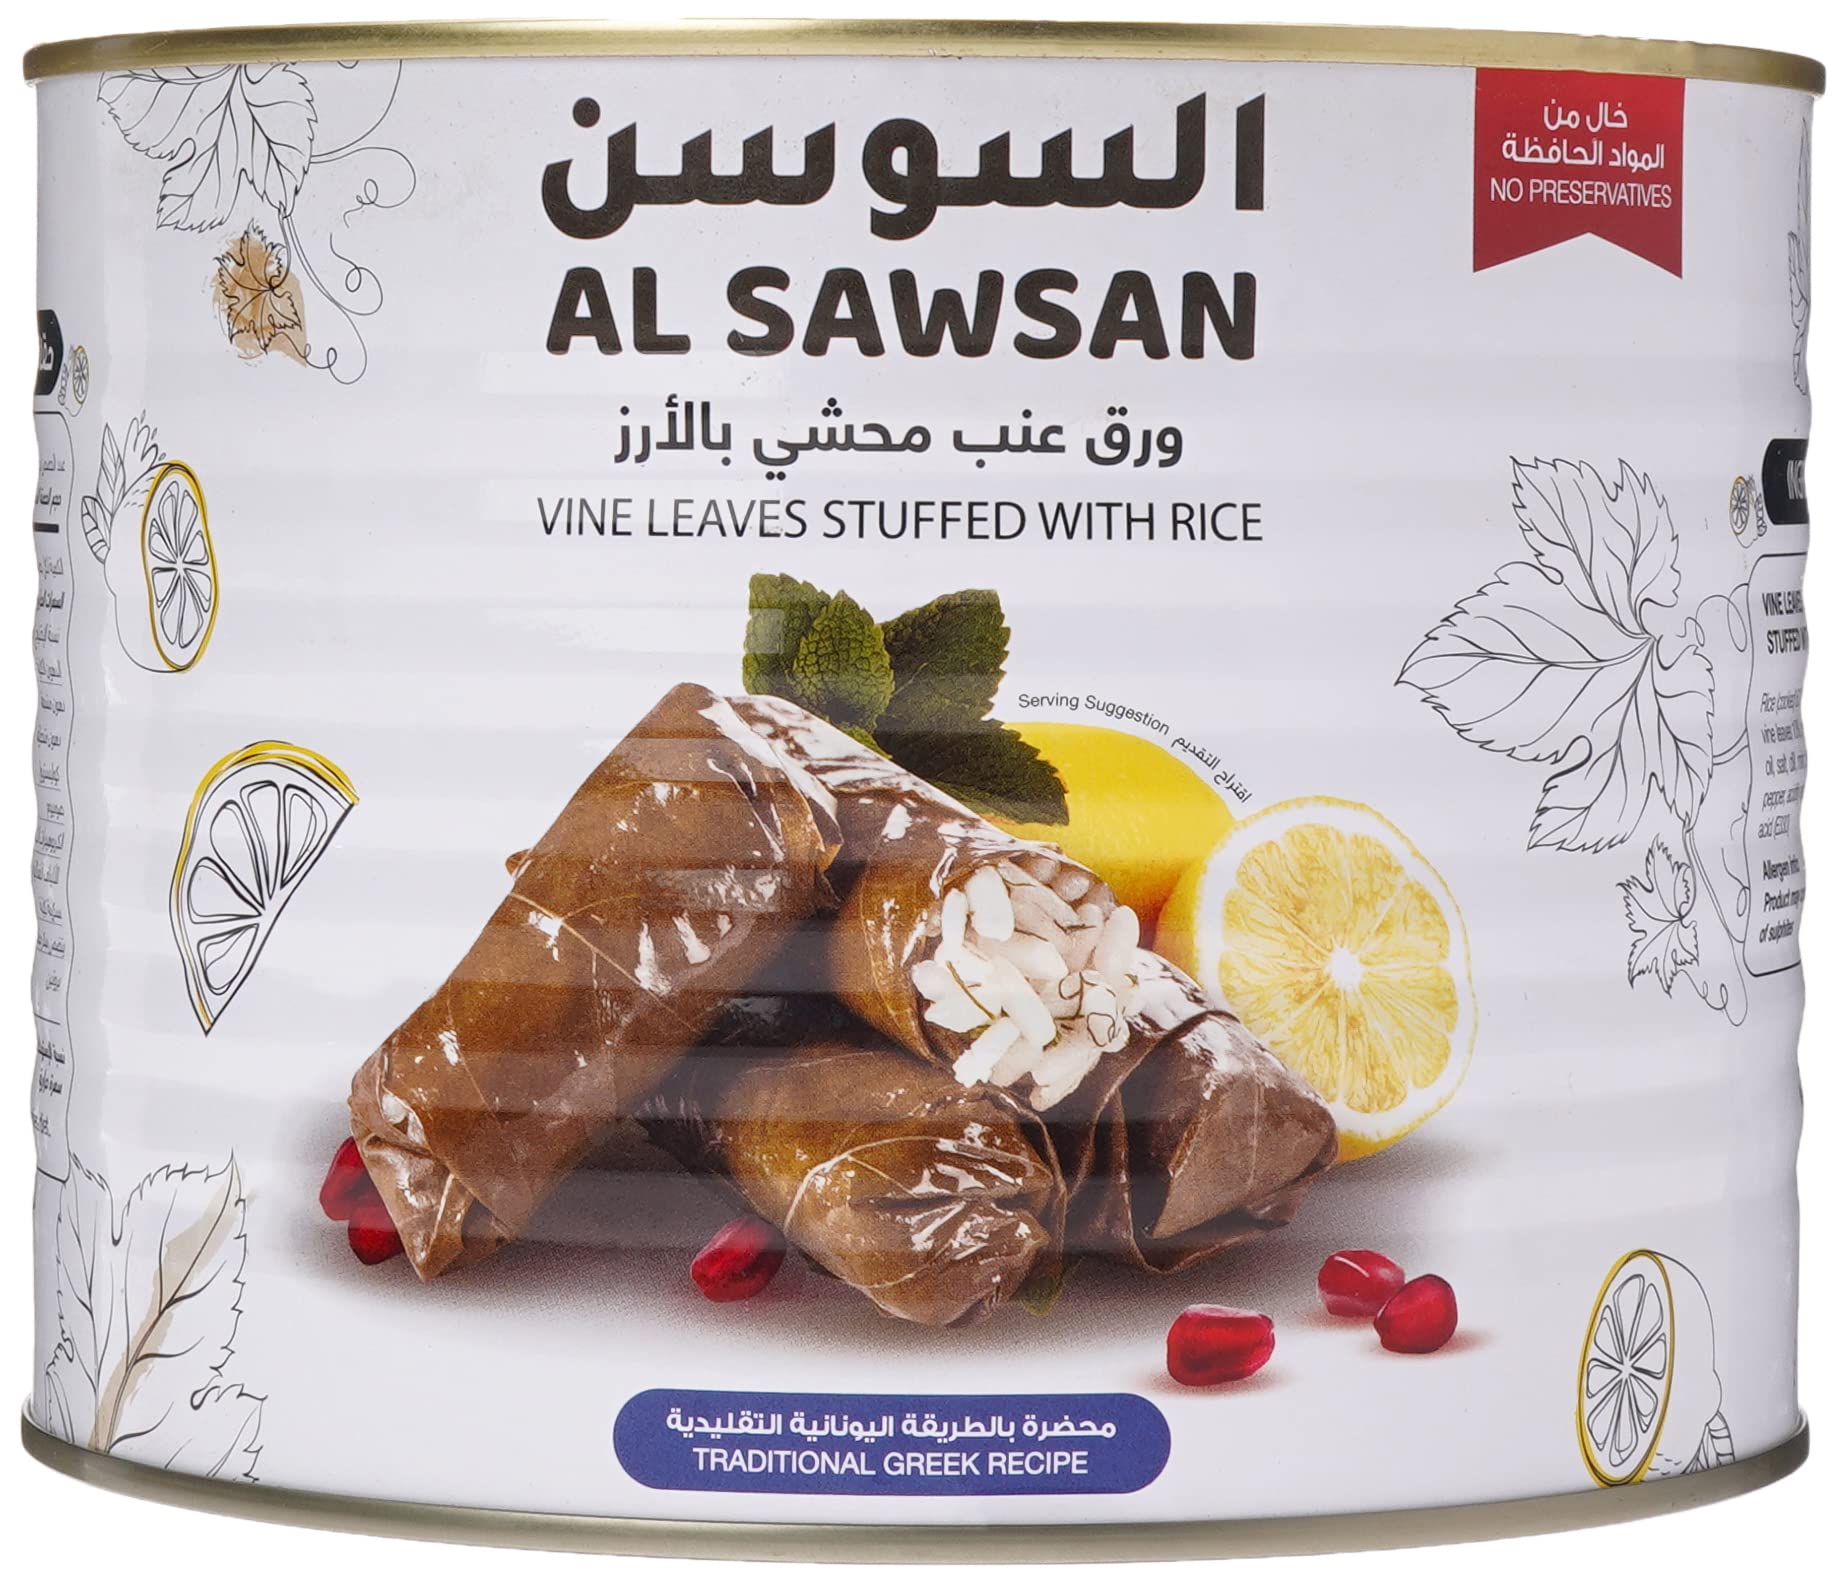 Al Sawsan Vine Leaves Stuffed with Rice, 2Kg - Pack of 1, White